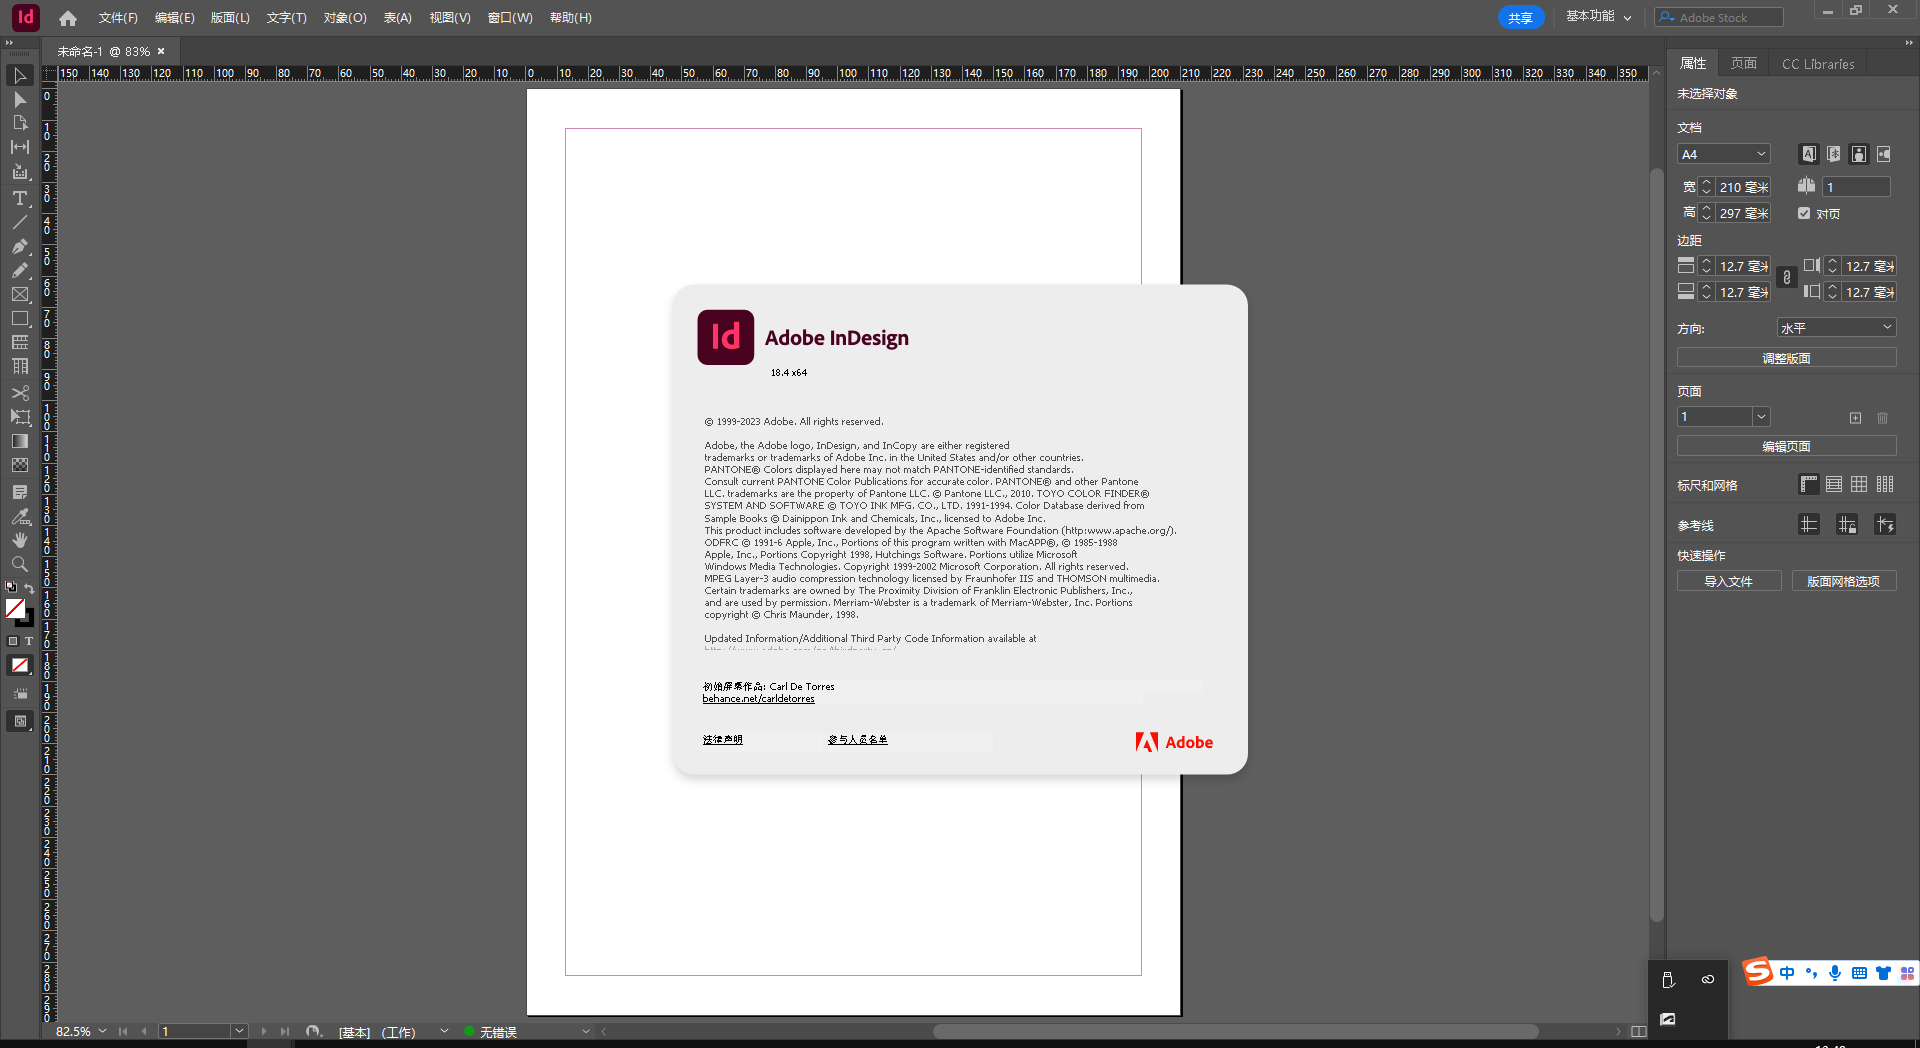 Adobe InDesign 2023 v18.5.0.57 instal the new for ios